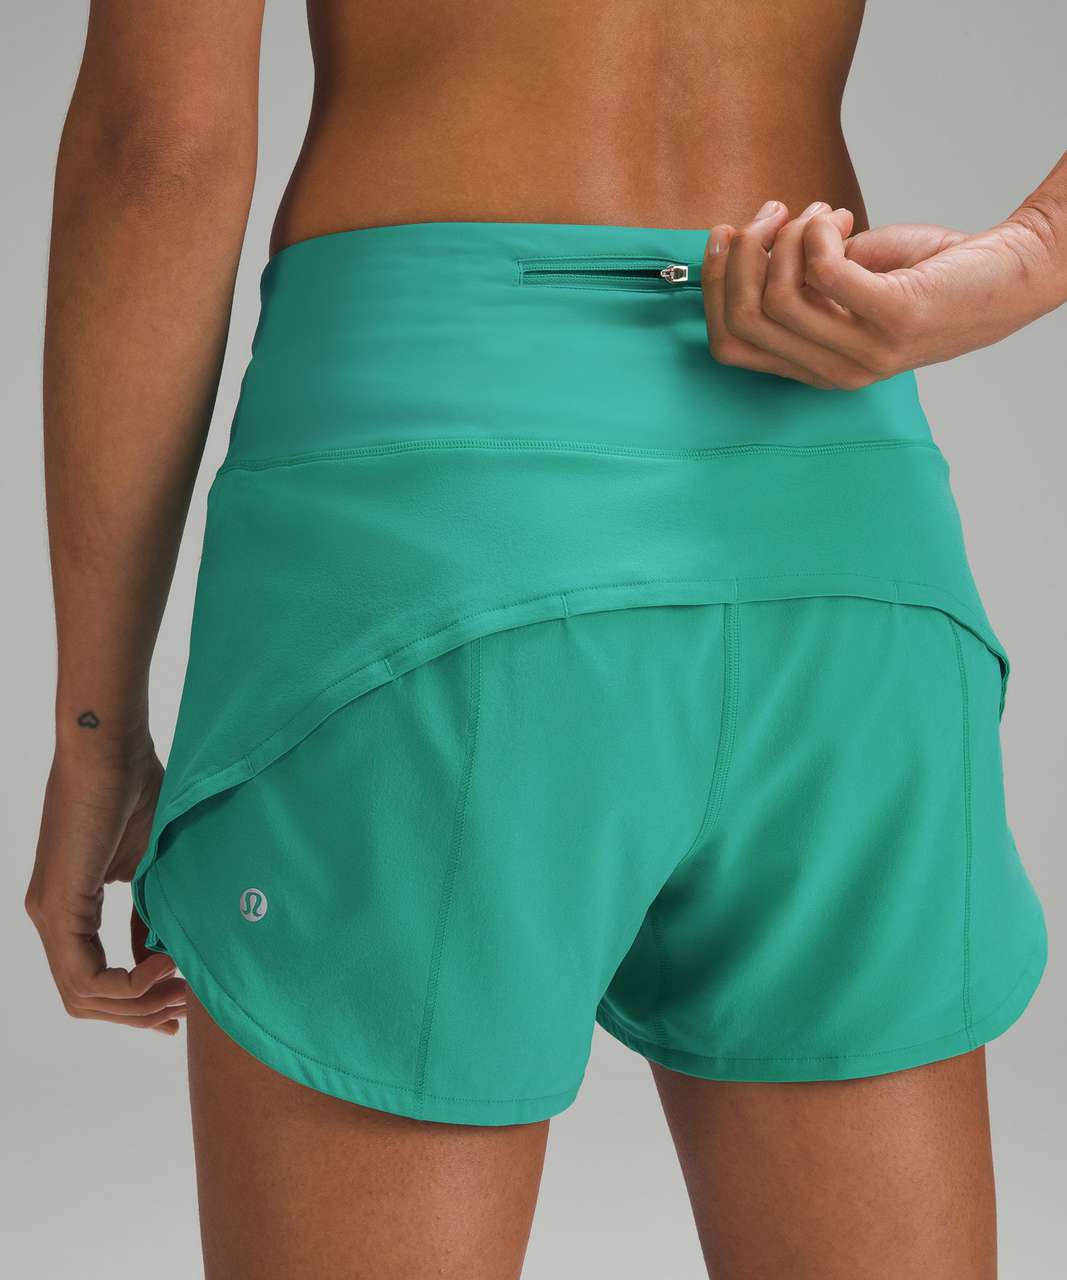 Lululemon Speed Up High-Rise Lined Short 4" - Kelly Green